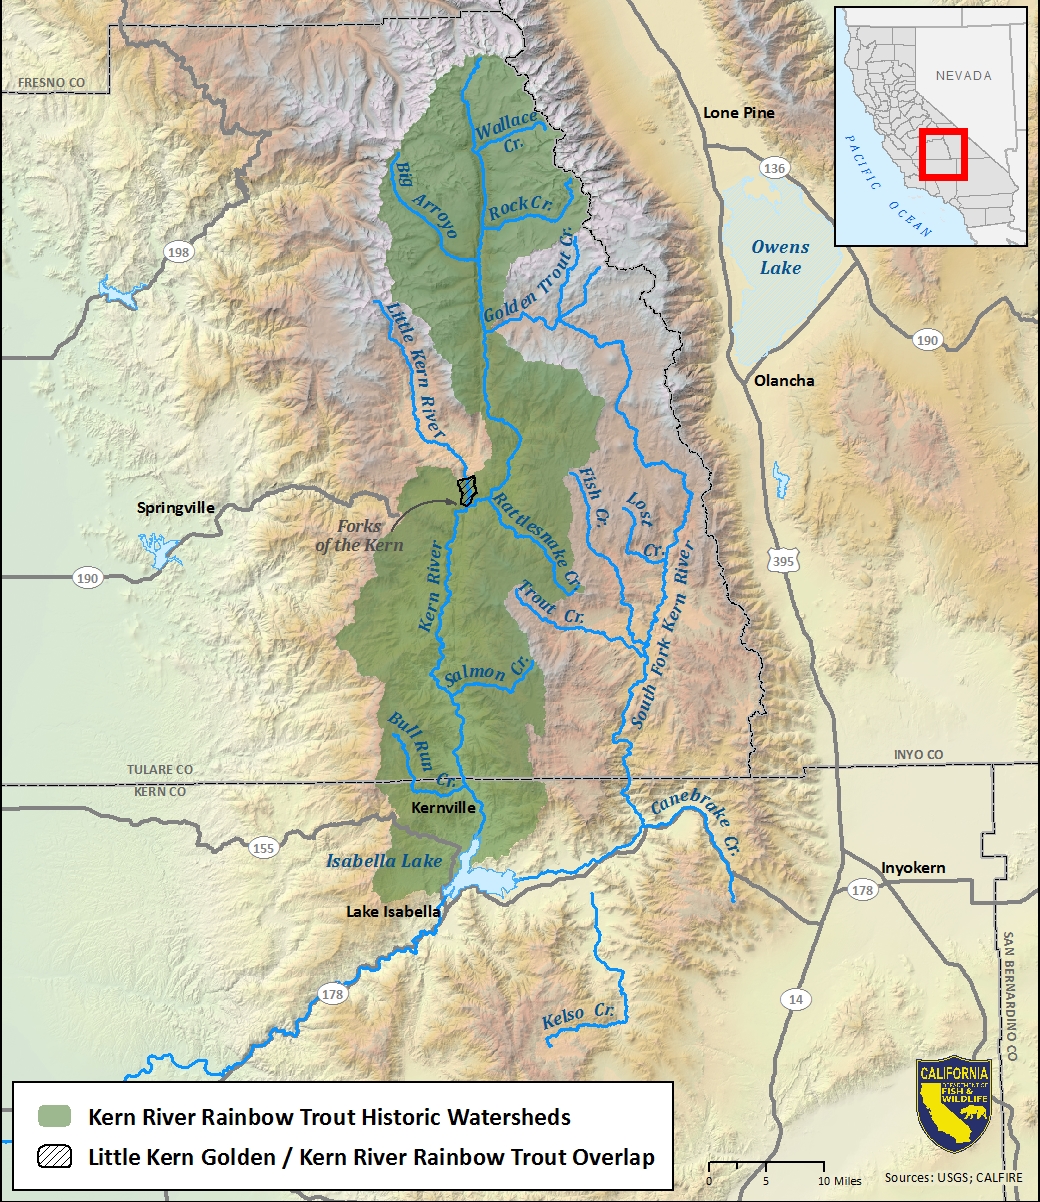 Map of Kern River rainbow trout historic watersheds - click to enlarge in new window